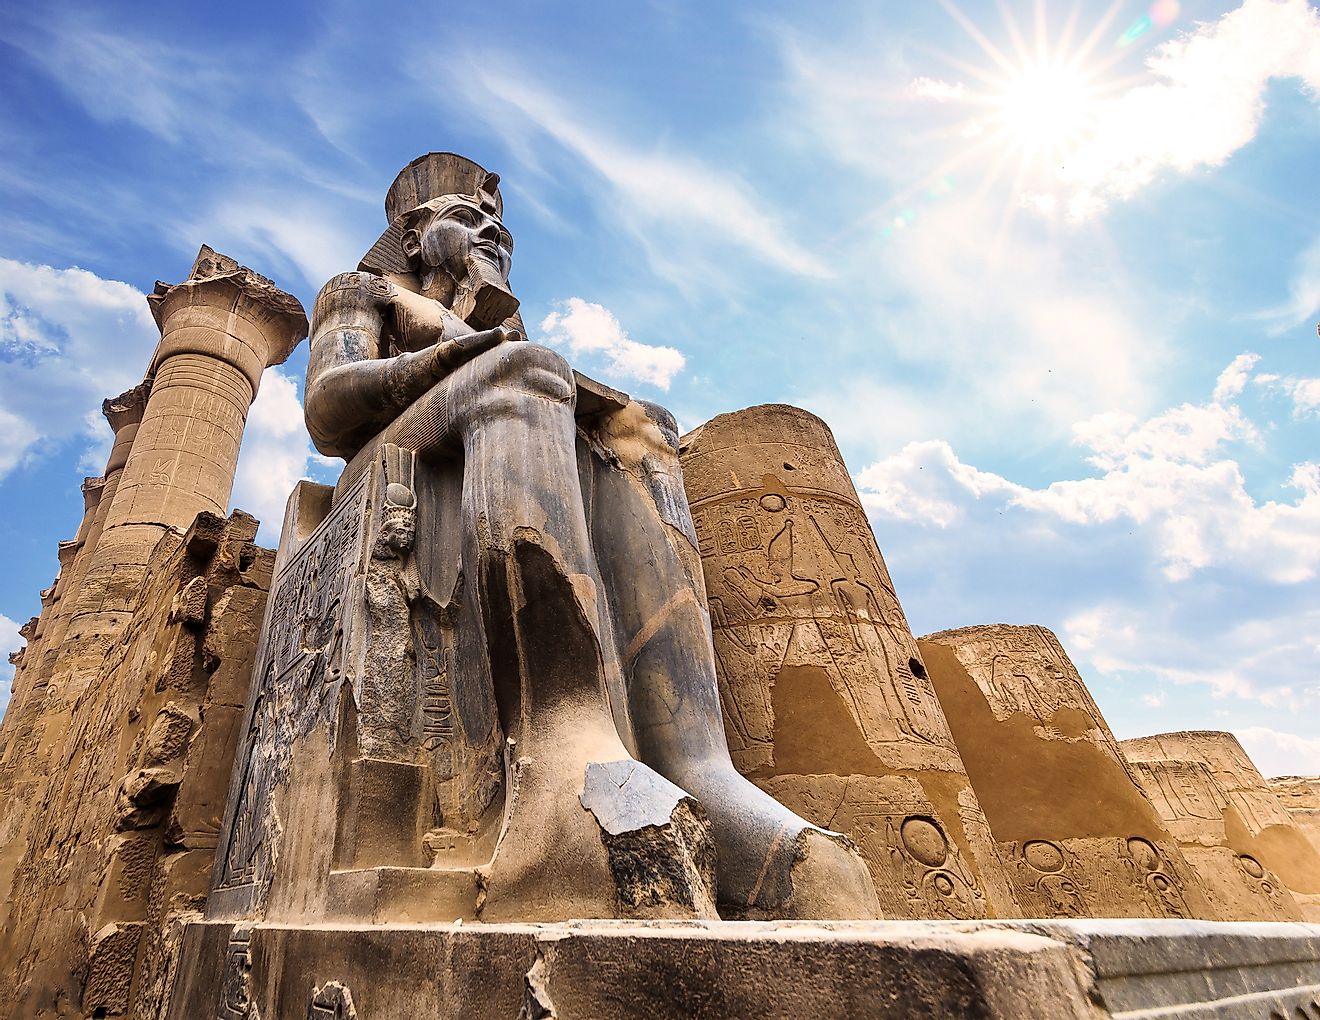 The huge statue of Ramesses II in Luxor Temple, Egypt. Image credit: Graficam Ahmed Saeed/Shutterstock.com